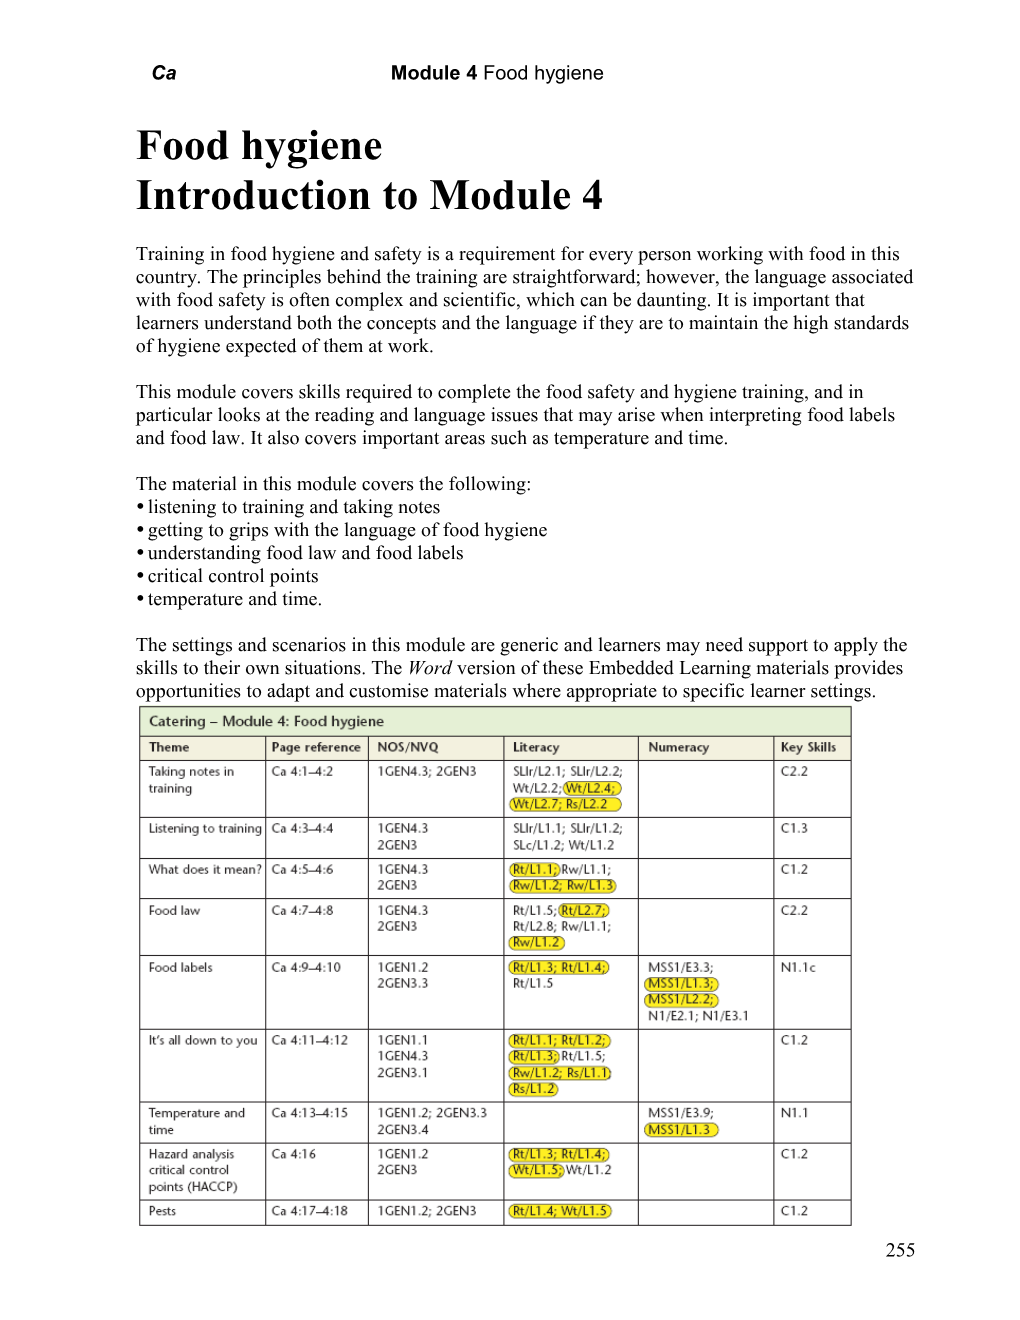 Introduction to Module 4